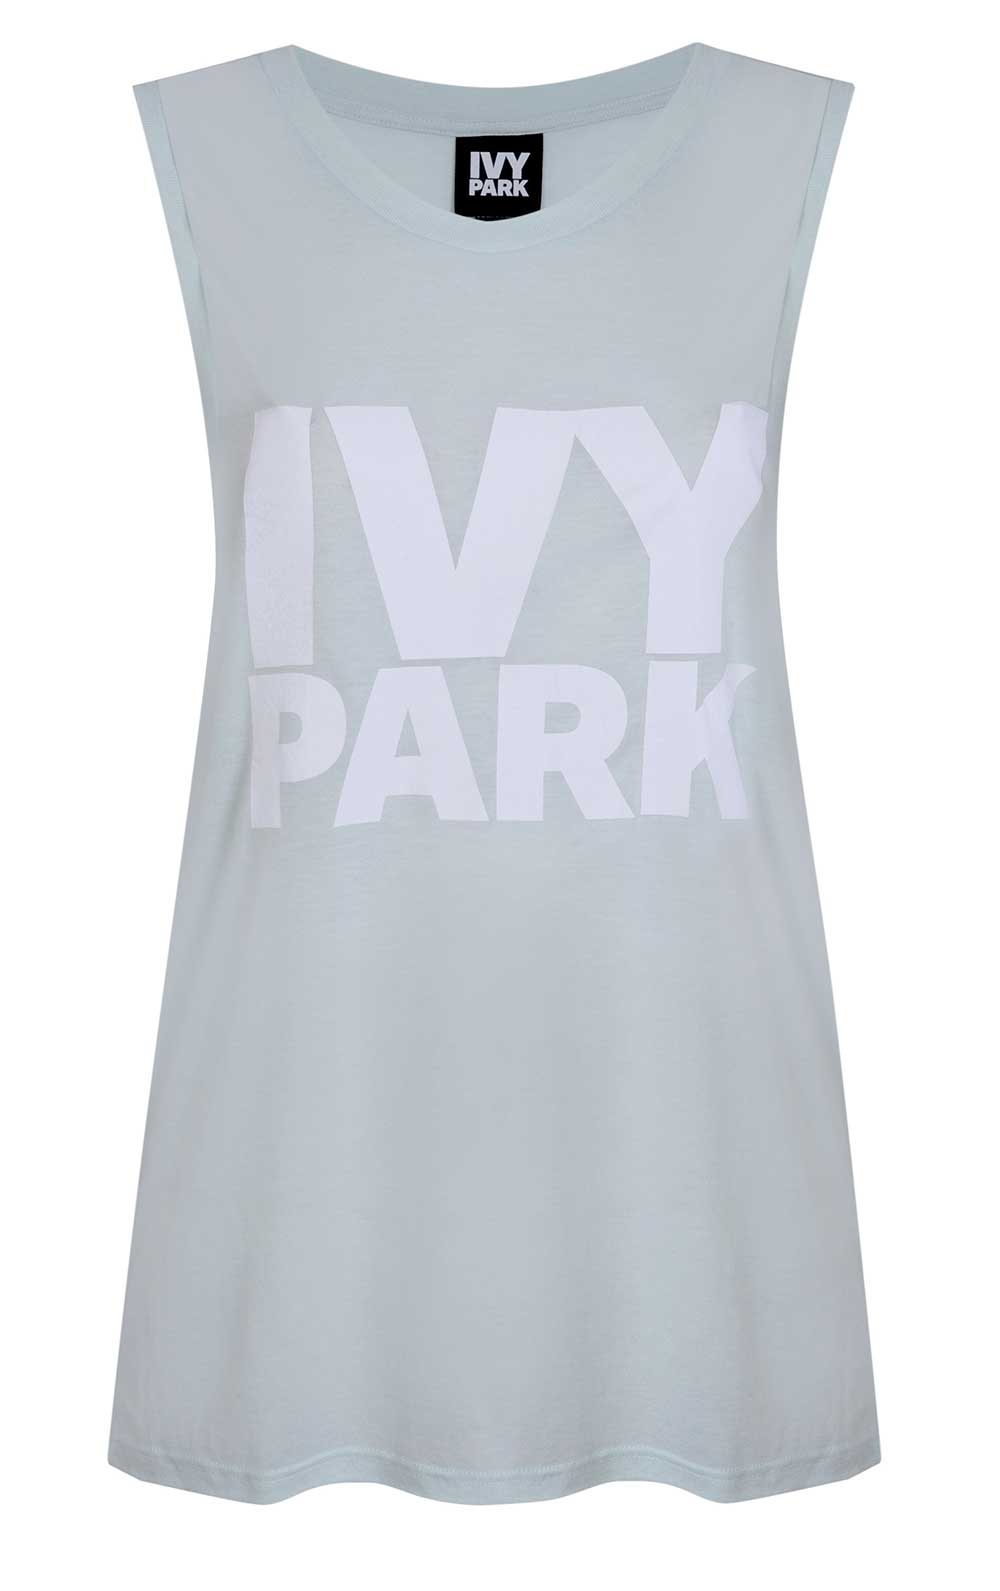 Drop Armhole Tank by Ivy Park, $40 from Topshop